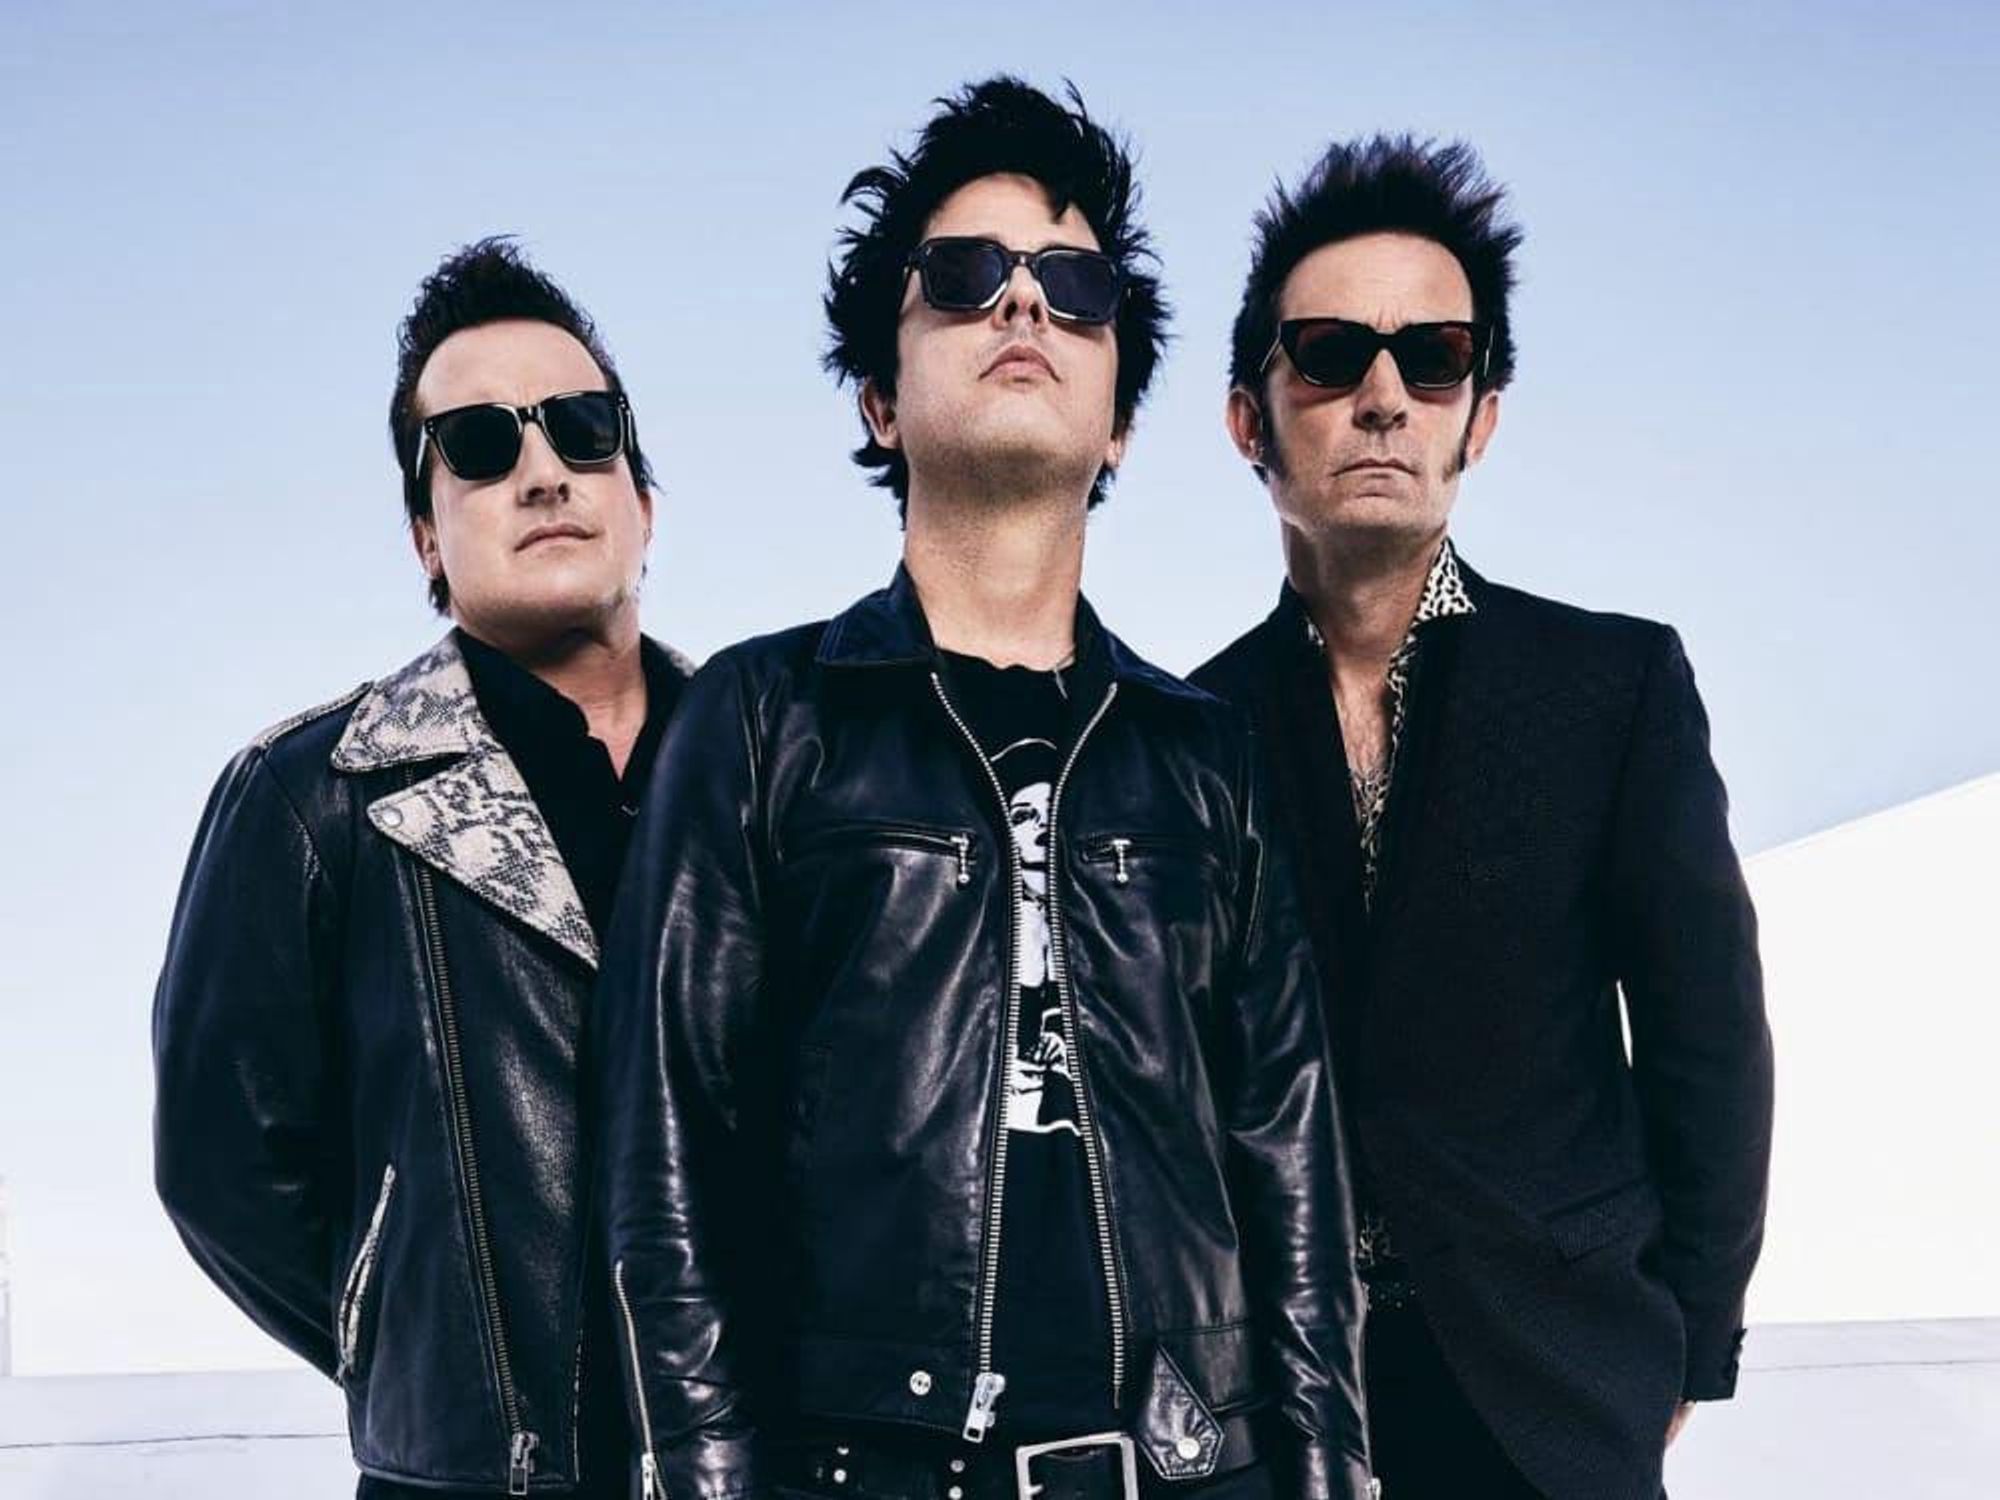 Green Day will kick off the weekend of musical performances on Friday, October 21.